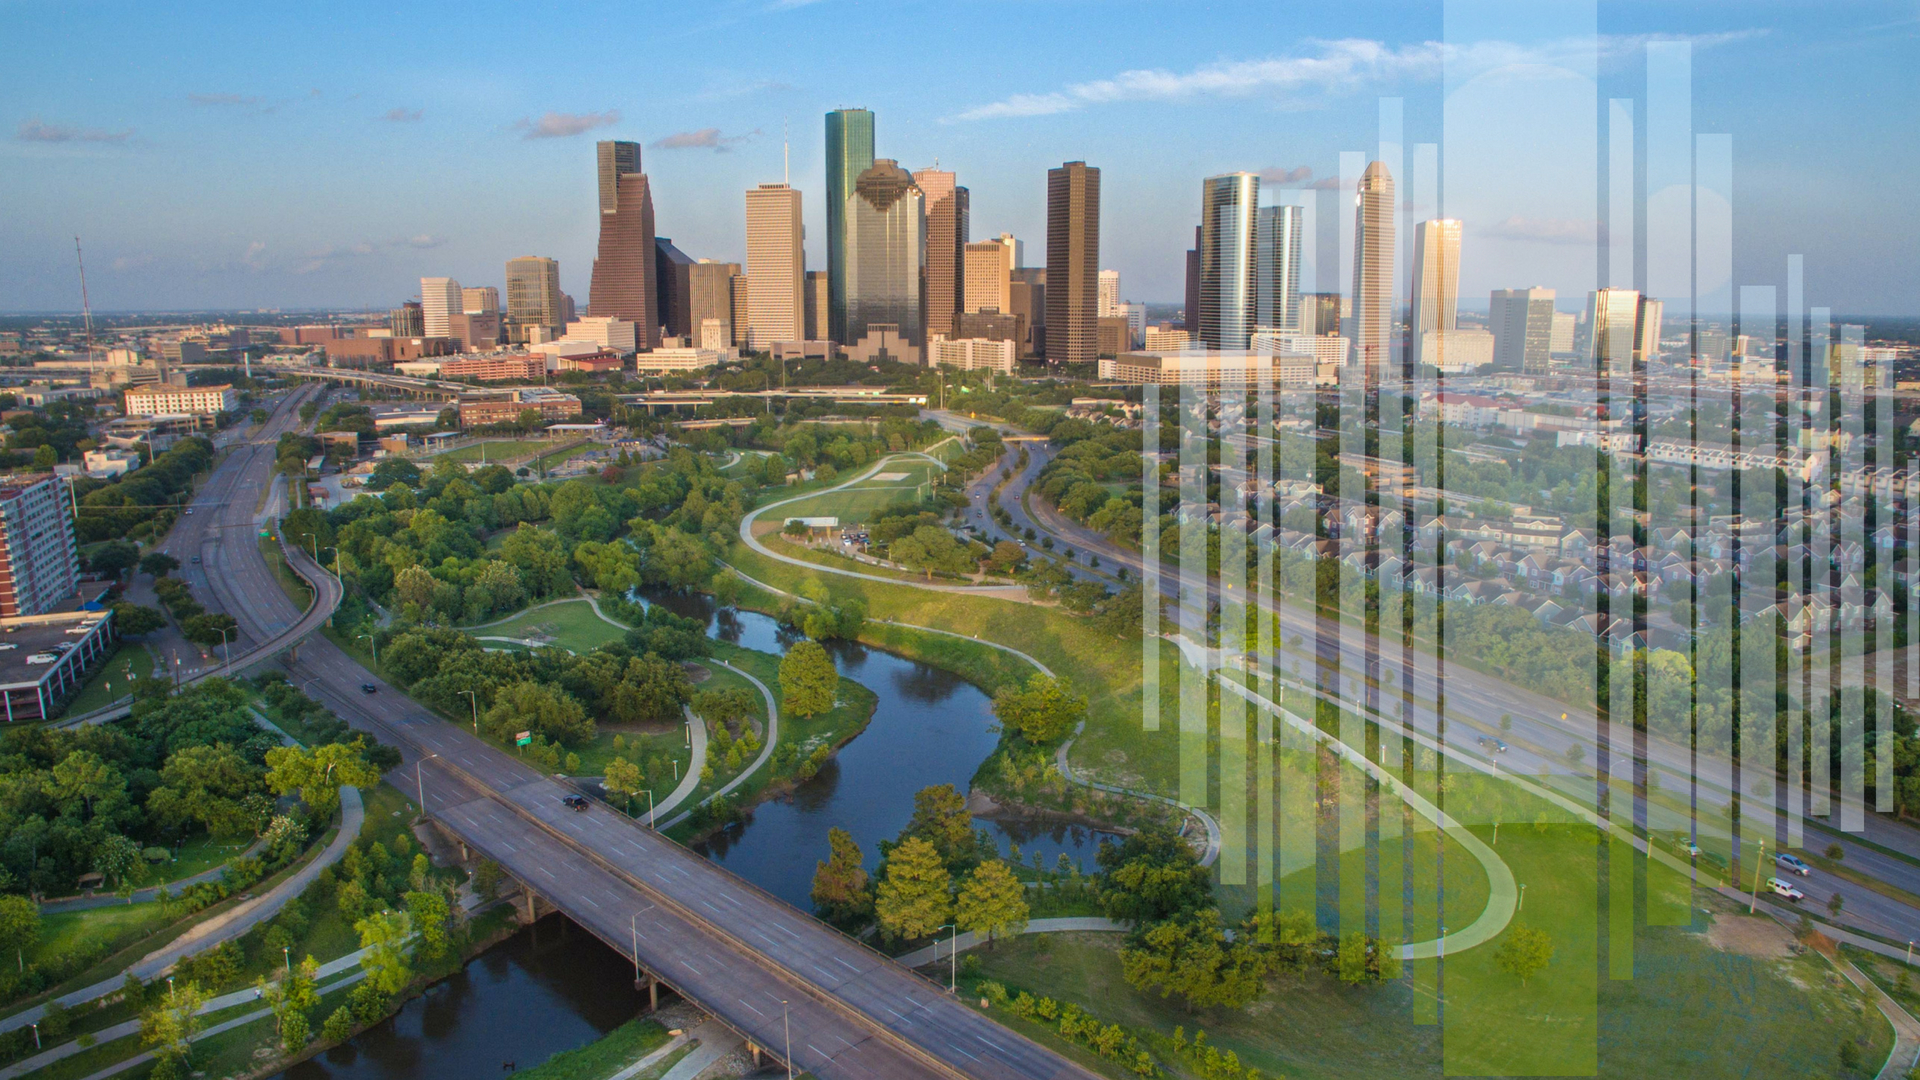 Houston’s Challenges Highlight Opportunities for Work in Sustainability